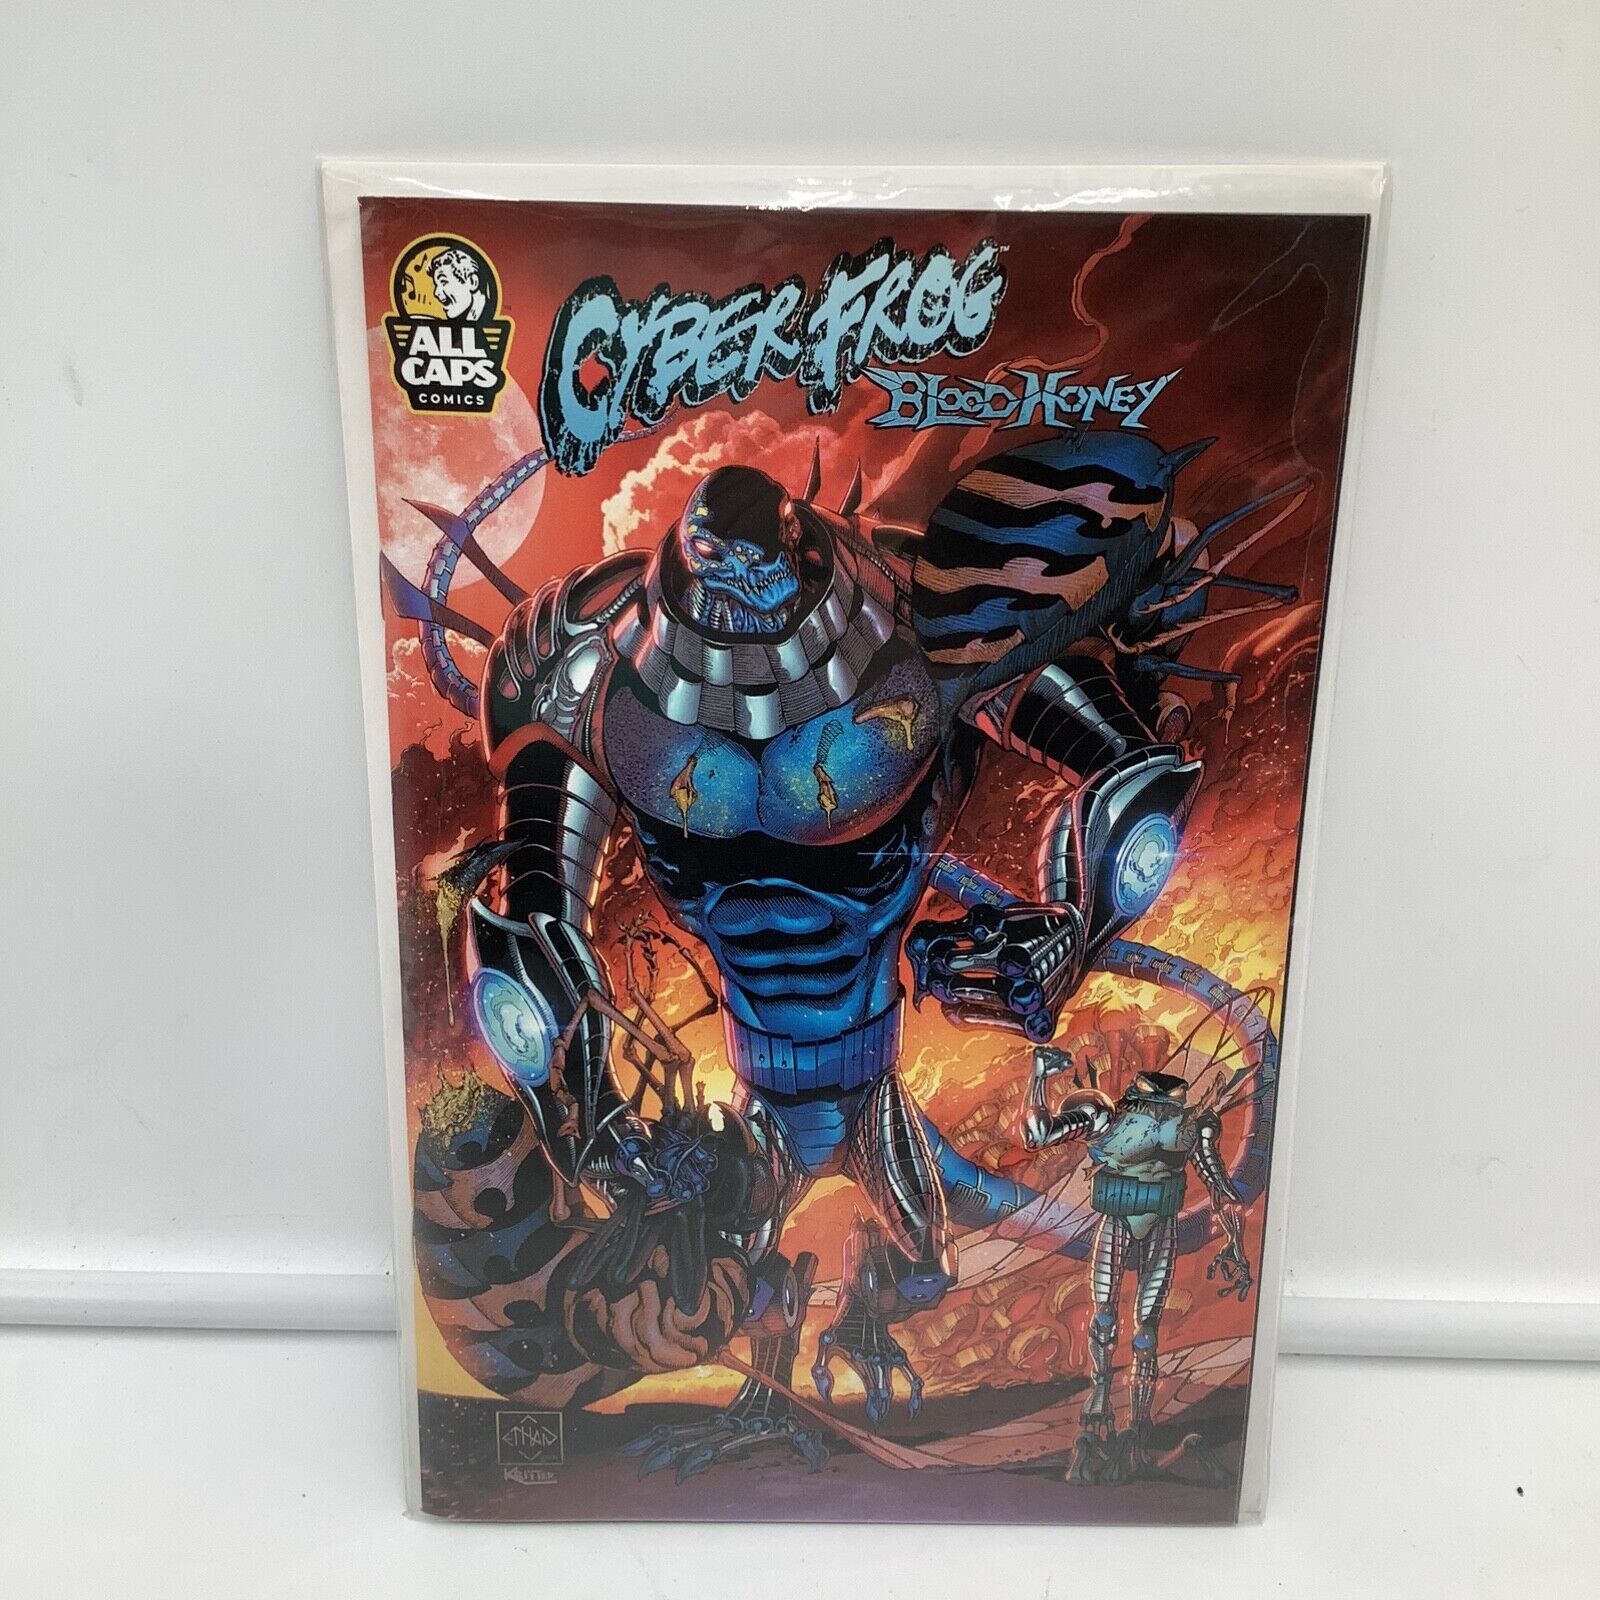 Cyberfrog: Bloodhoney Team Up Variant Signed Comic Book Multicolor